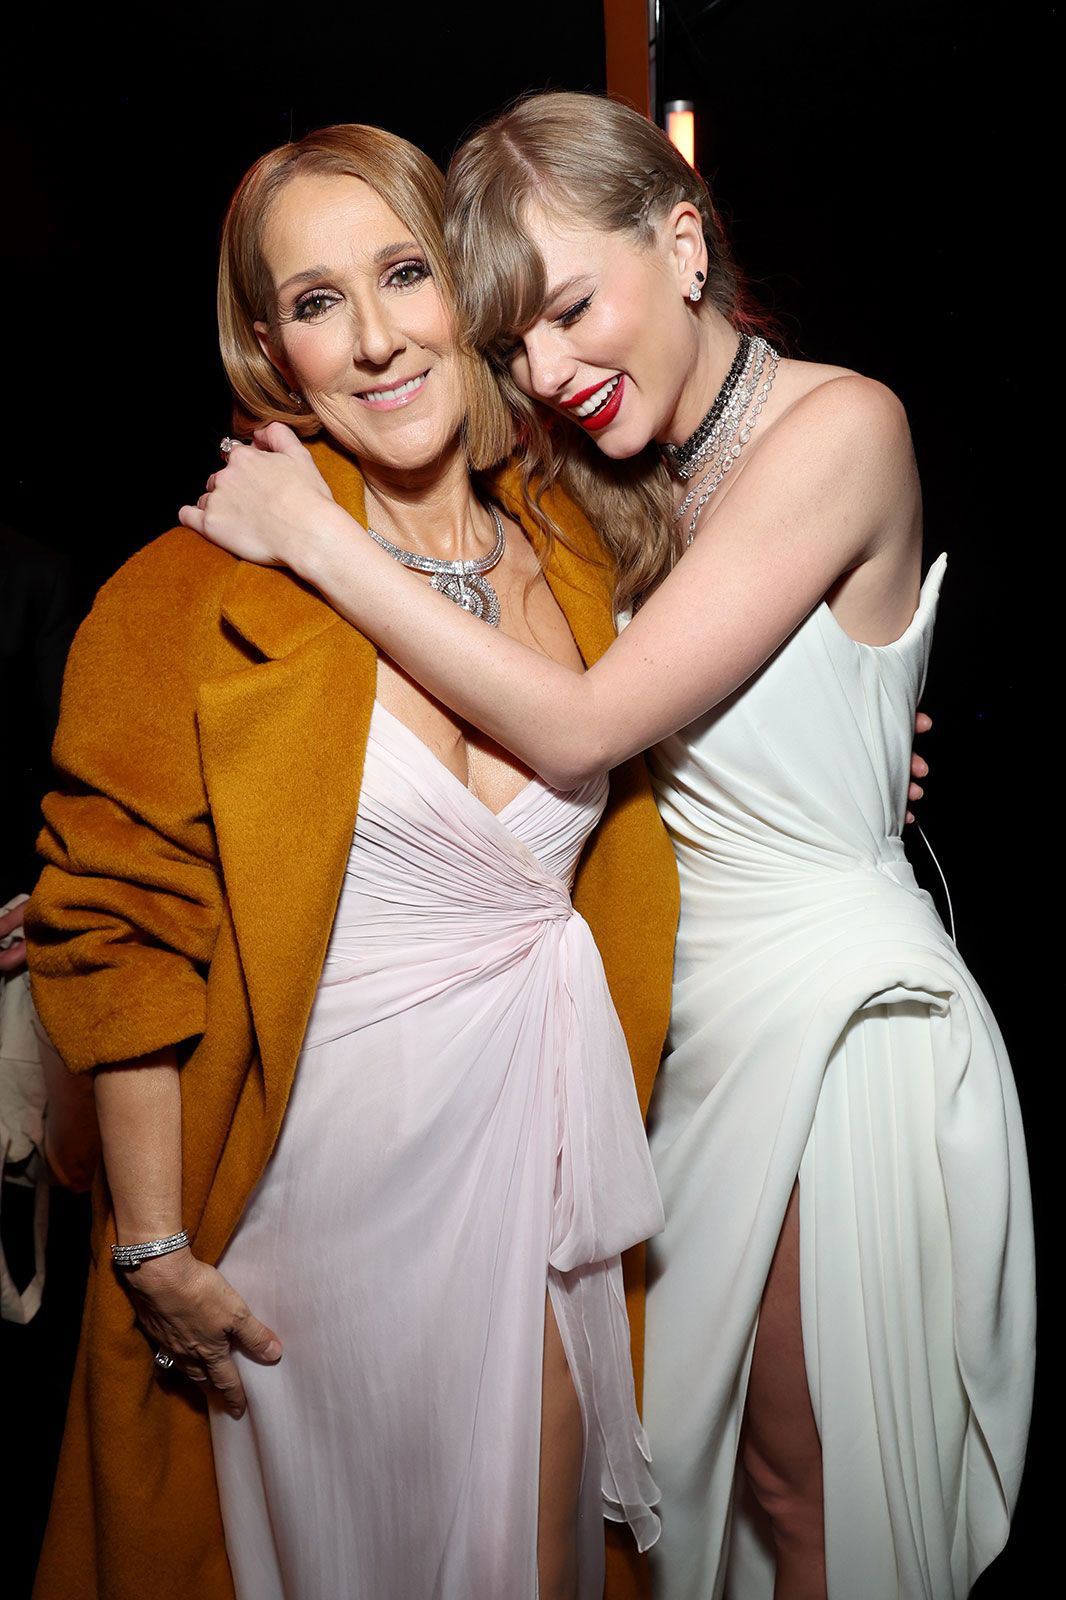 <i>Kevin Mazur/Getty Images for The Recording Academy</i><br/>Celine Dion and Taylor Swift embrace at the 66th GRAMMY Awards on February 4.